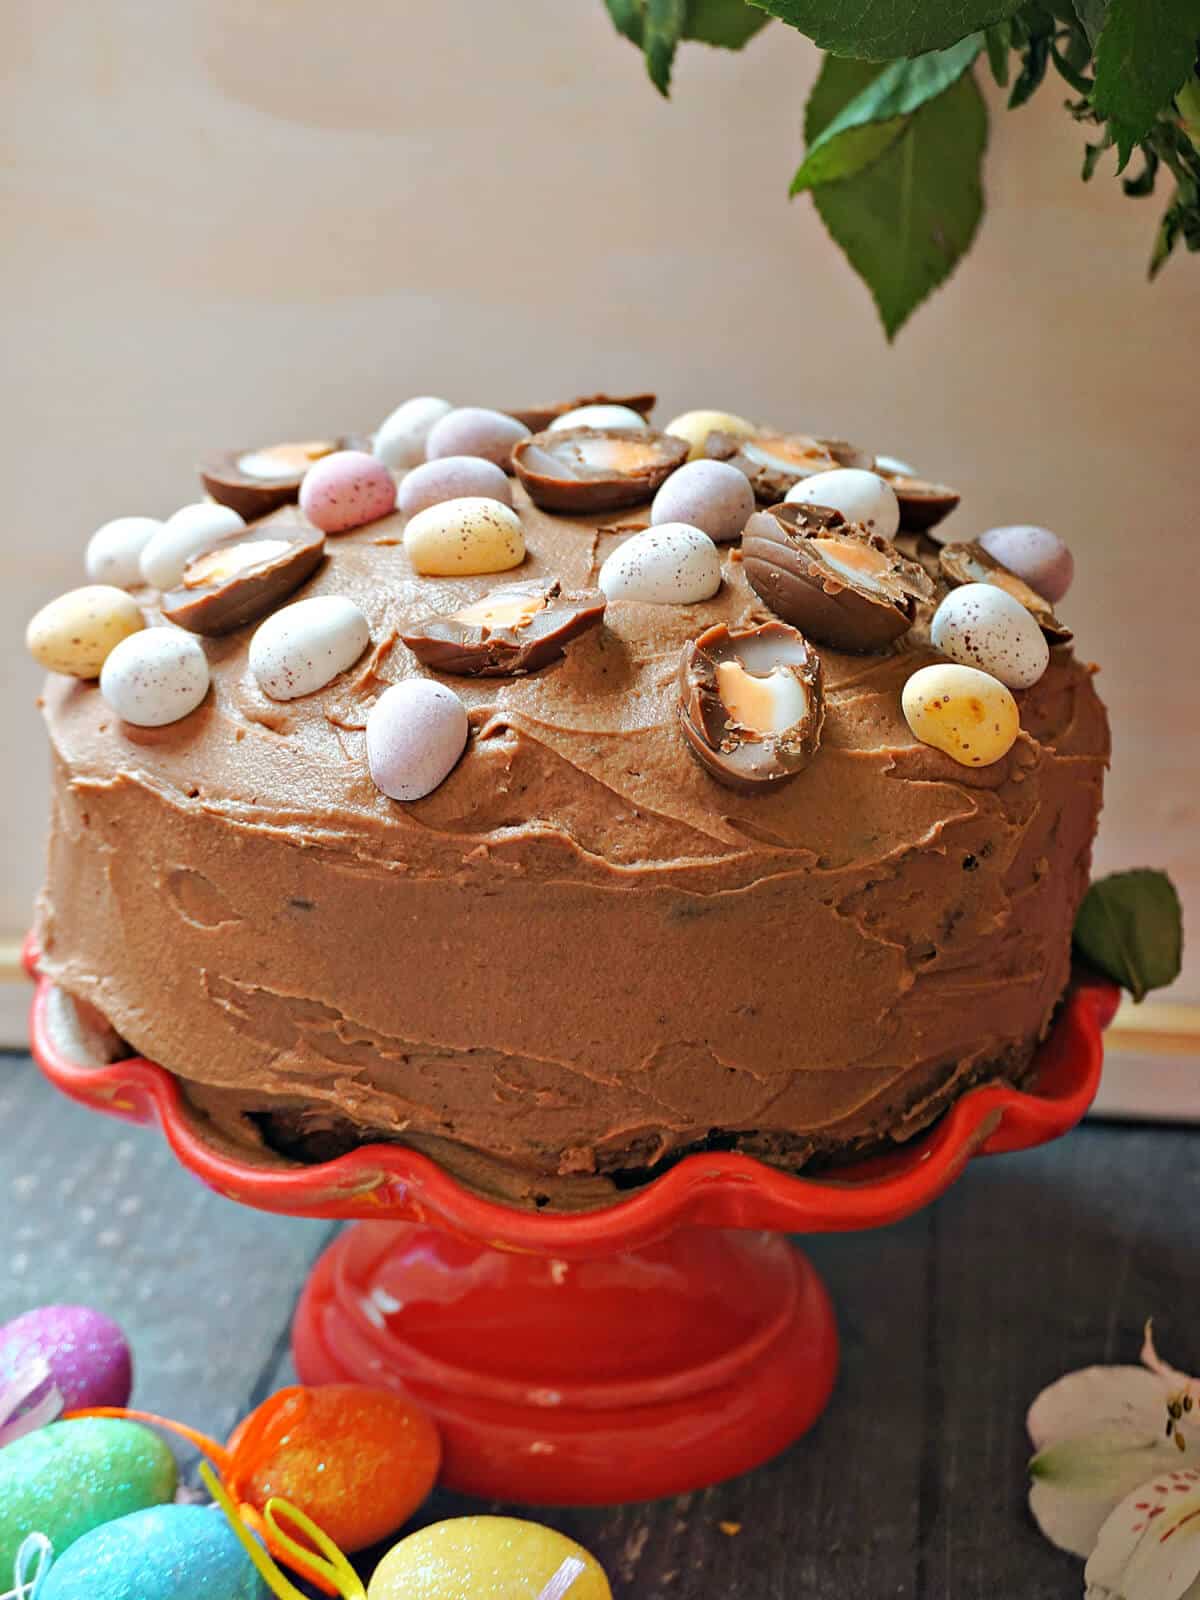 A chocolate cake topped with easter eggs on a red cake stand.